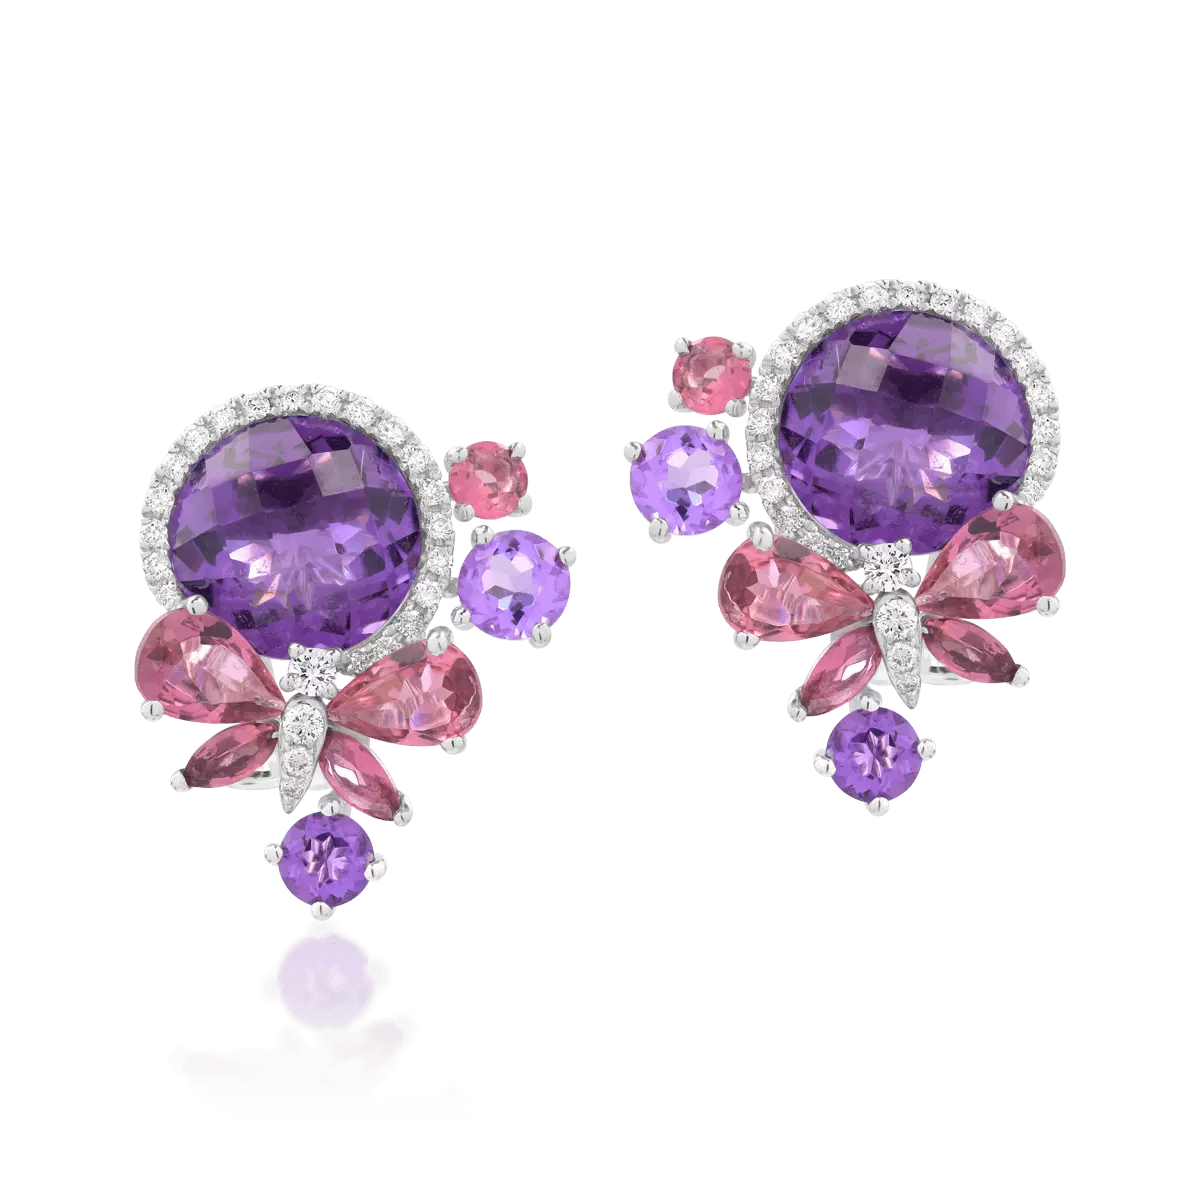 18K white gold earrings with 9.4ct semiprecious stones